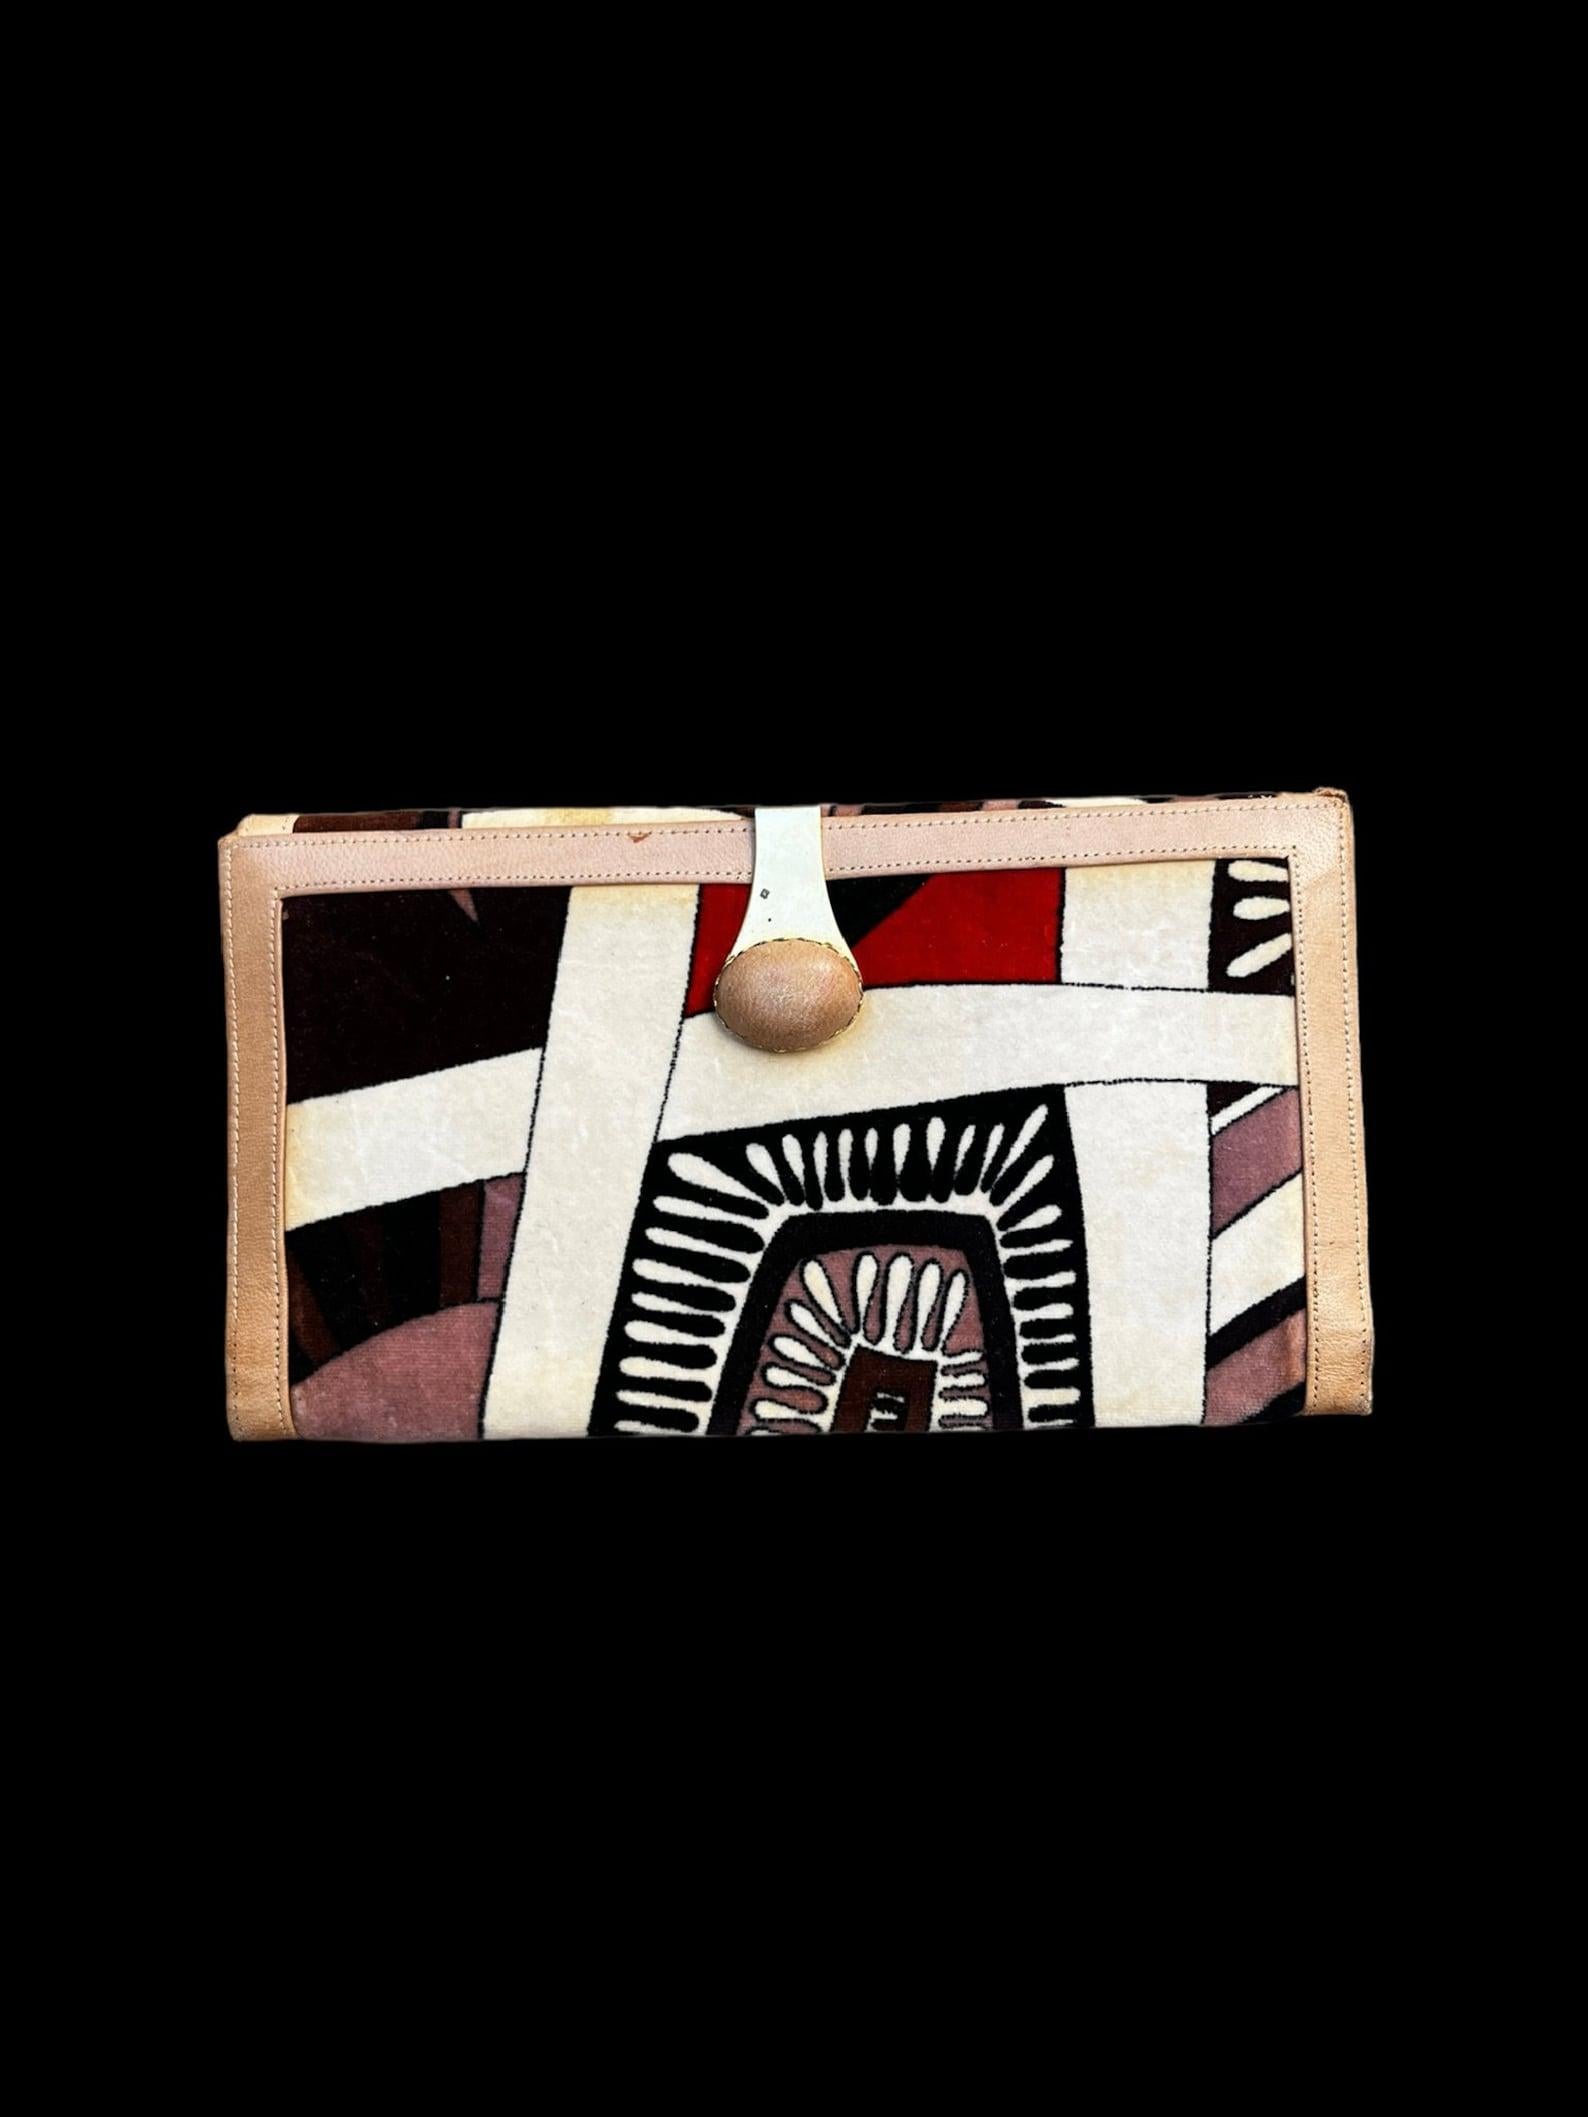 Vintage Emilio Pucci wallet
velveteen multi colored Pucci print
light brown leather
snap closure on one side
gold metal clip closure on the other side

✩ A wonderful piece of fashion history!

Circa 1960s

Markings: Gold stamp Emilio Pucci by Jana